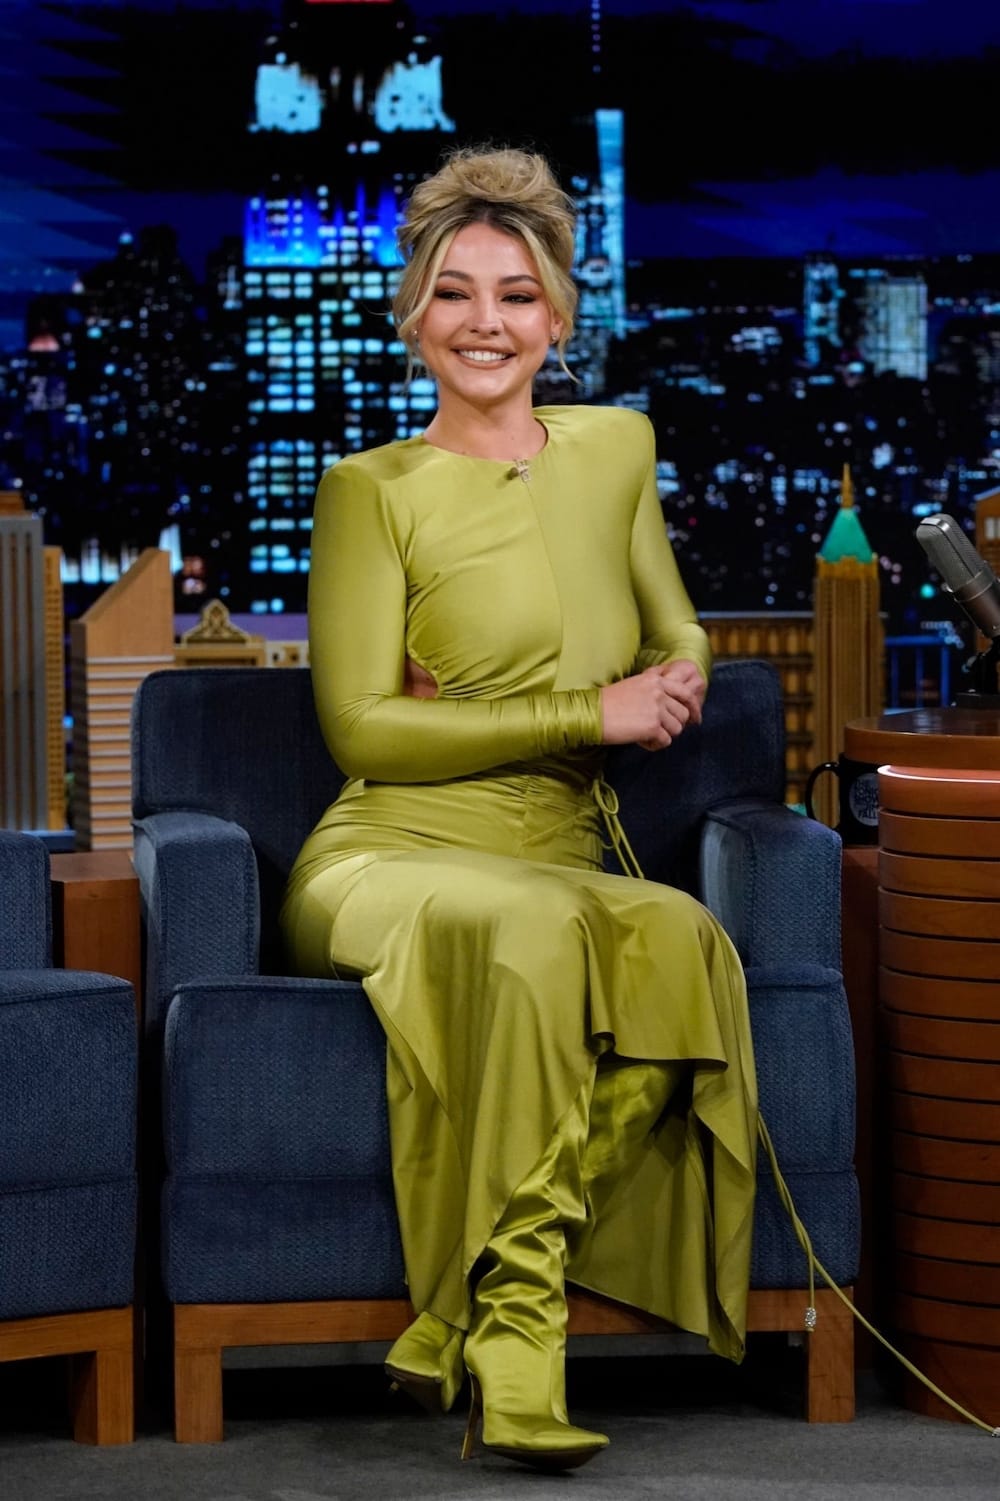 Madelyn Cline in a Pretty Alexandre Vauthier Dress at The Tonight Show